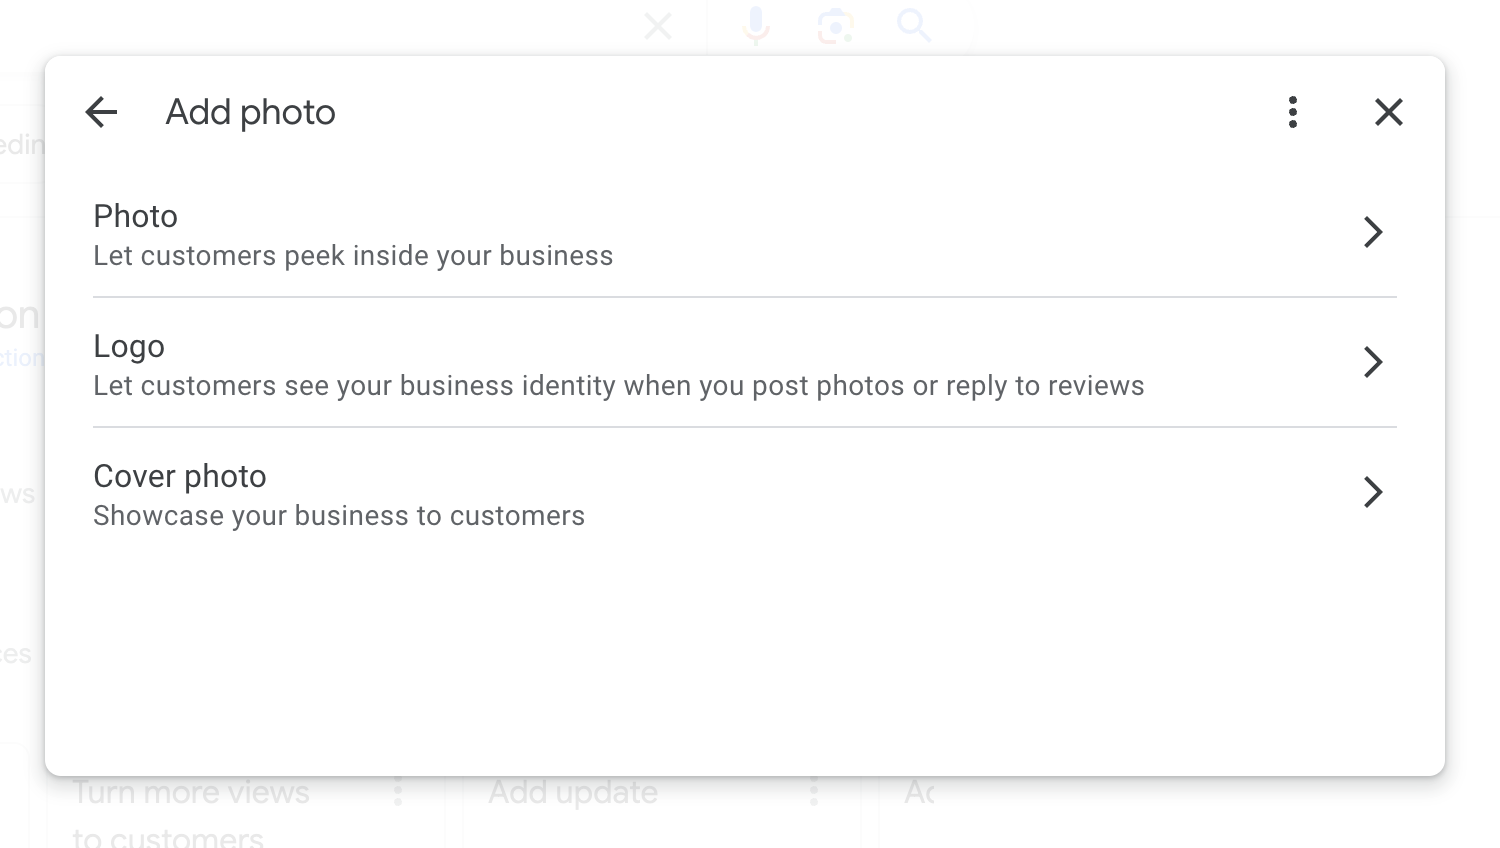 Adding photos panel in Google Business Profile